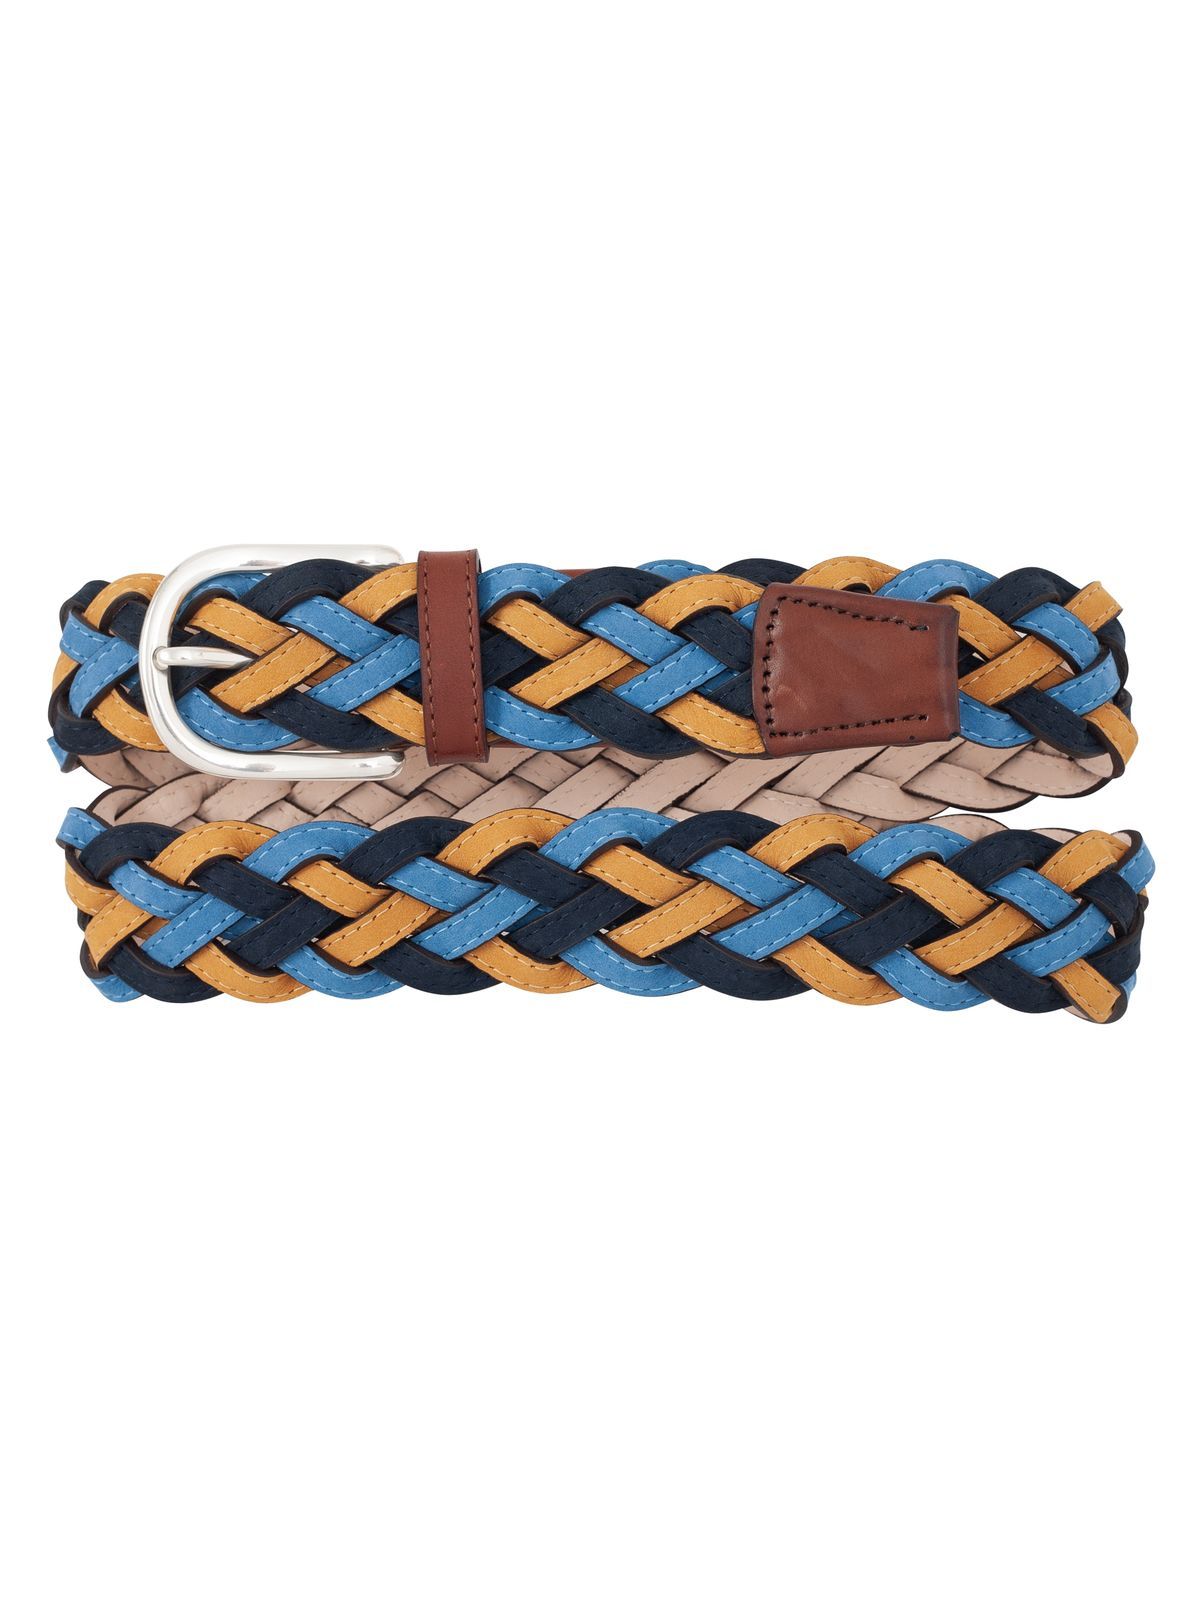 3-Color Leather Braided Belt